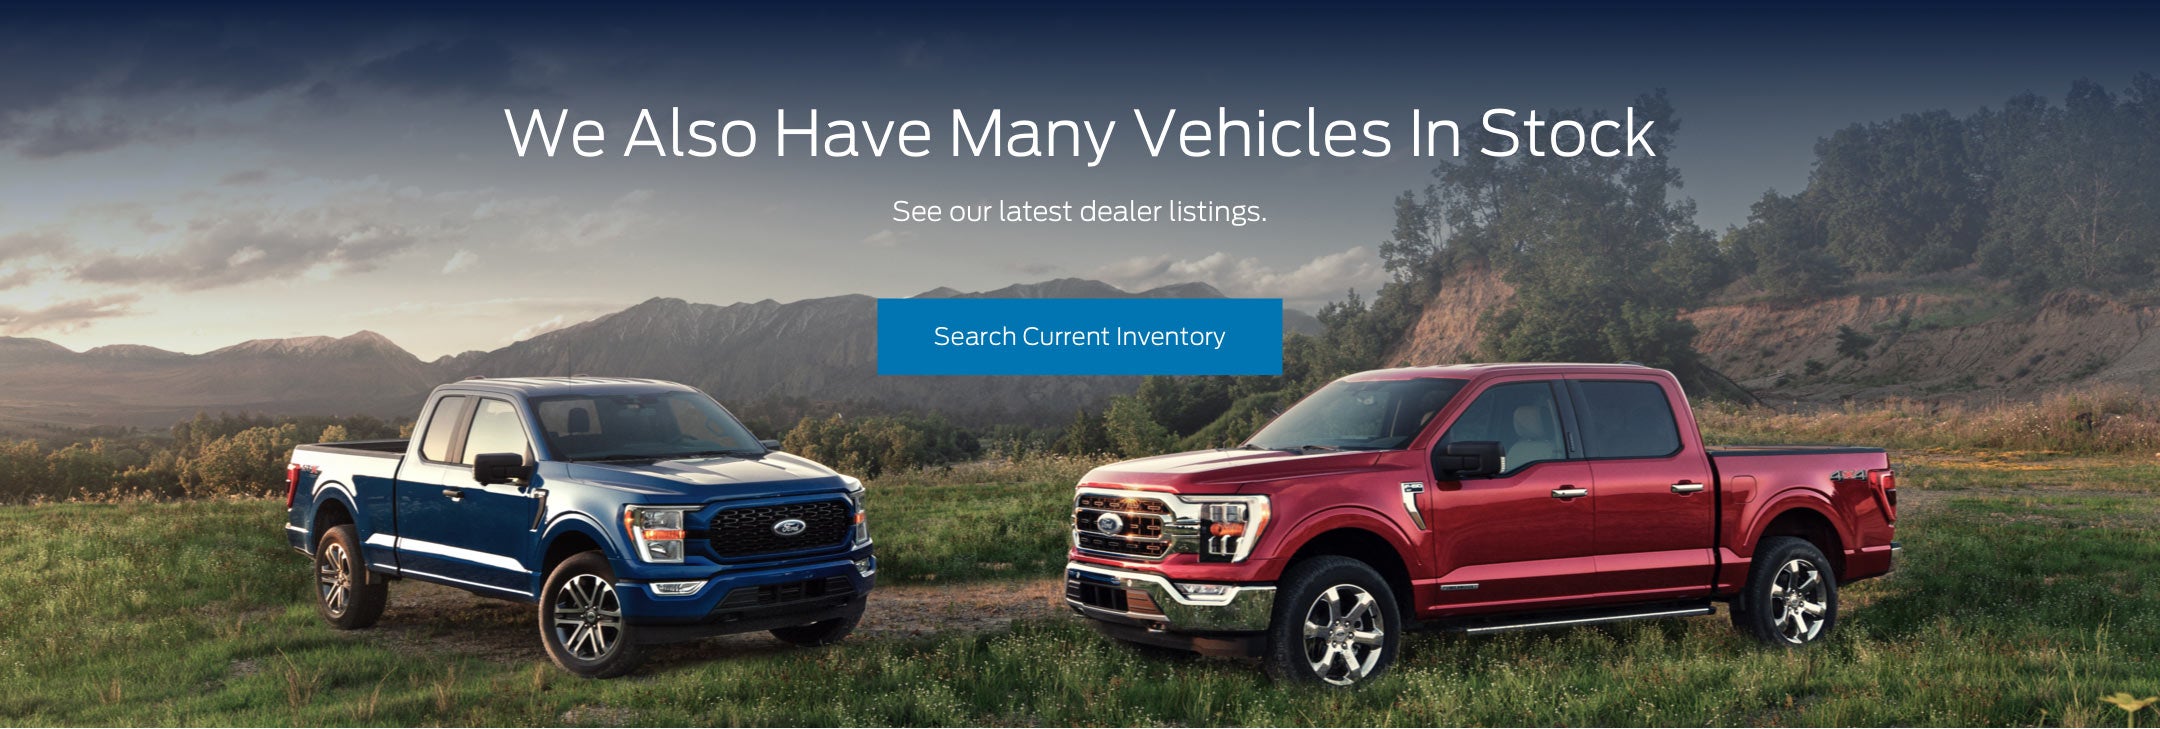 Ford vehicles in stock | Ford of West Memphis in West Memphis AR